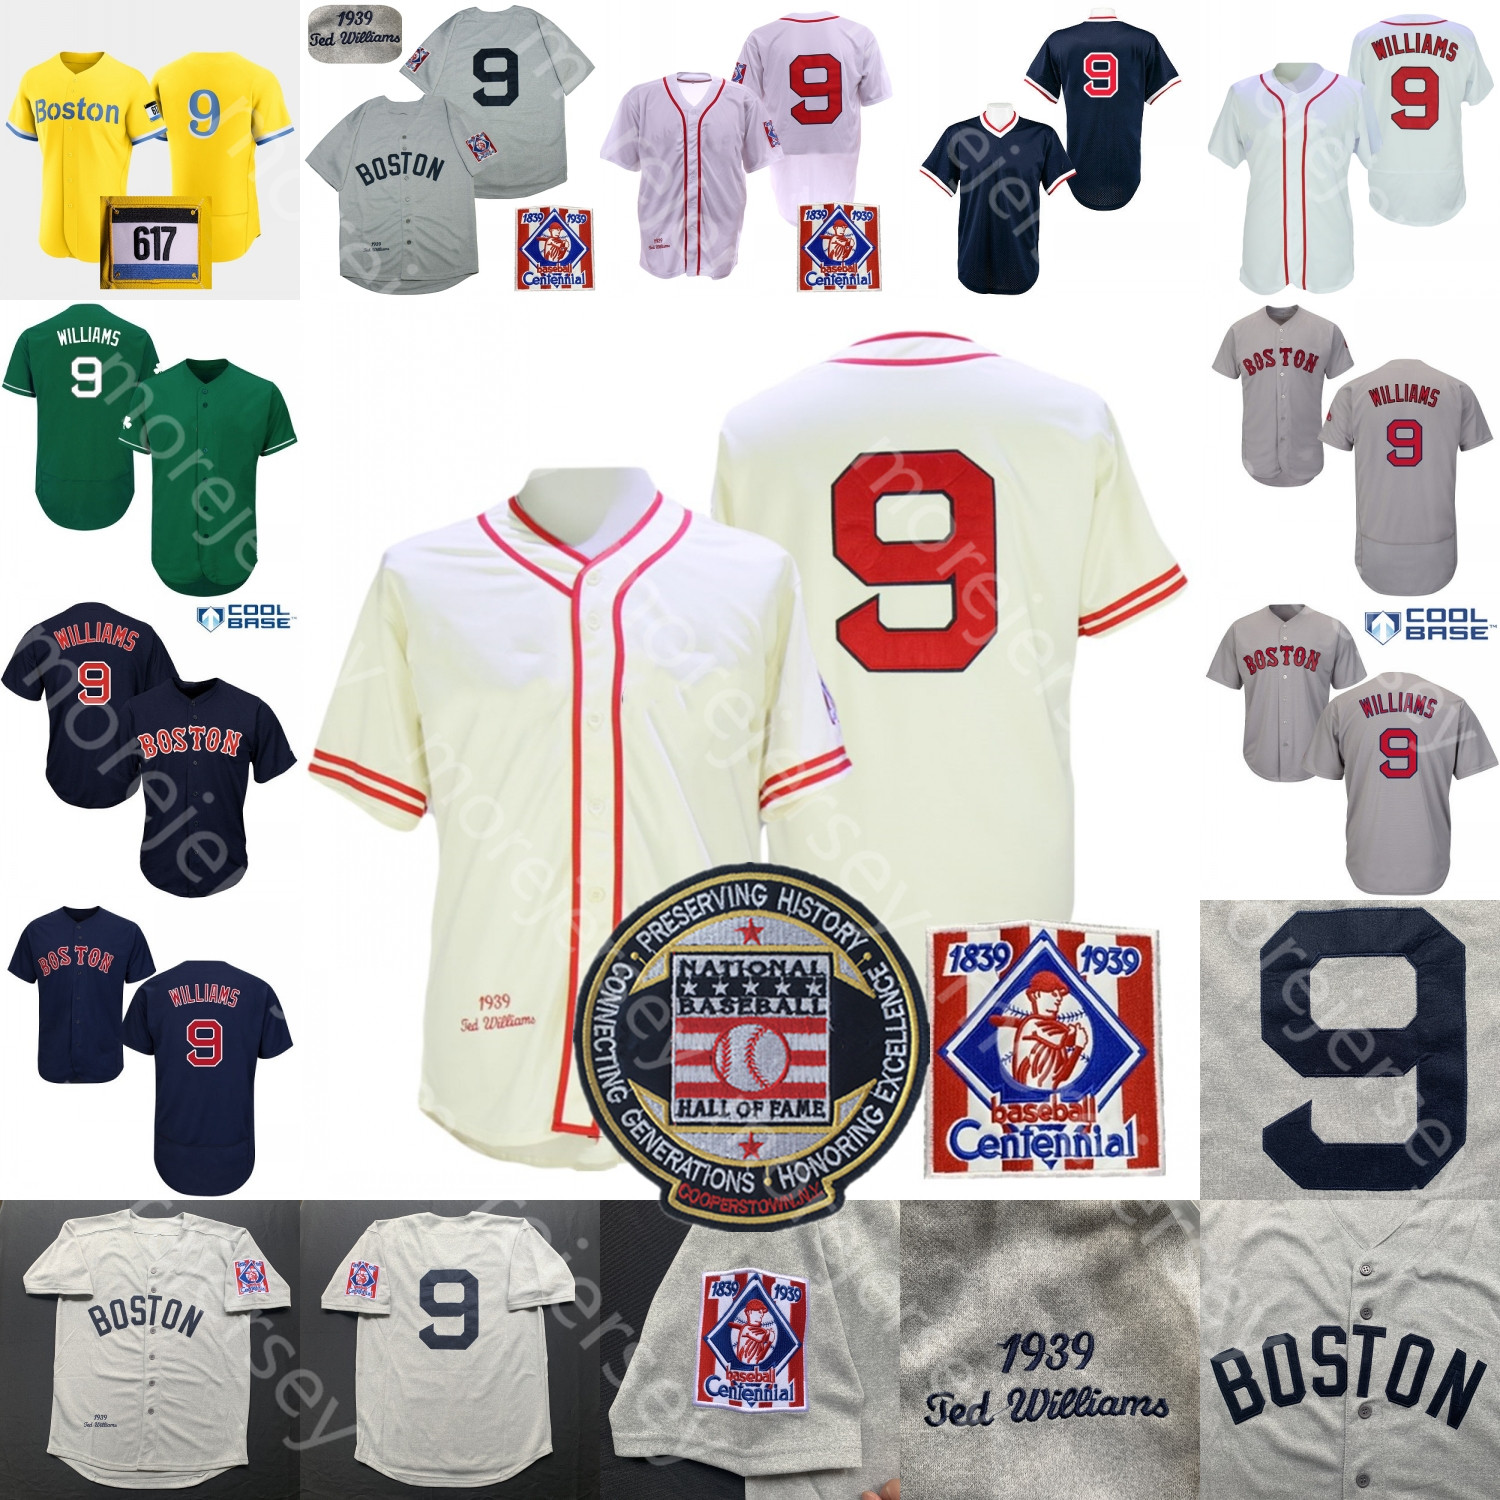 TED Williams Jersey Hall of Fame Patch 1939 Creme grau Weiß Cooperstown 2021 City Connect Player Vaters Tag Great to Service Grey Navy Rote Weiße Fans Spieler Grün